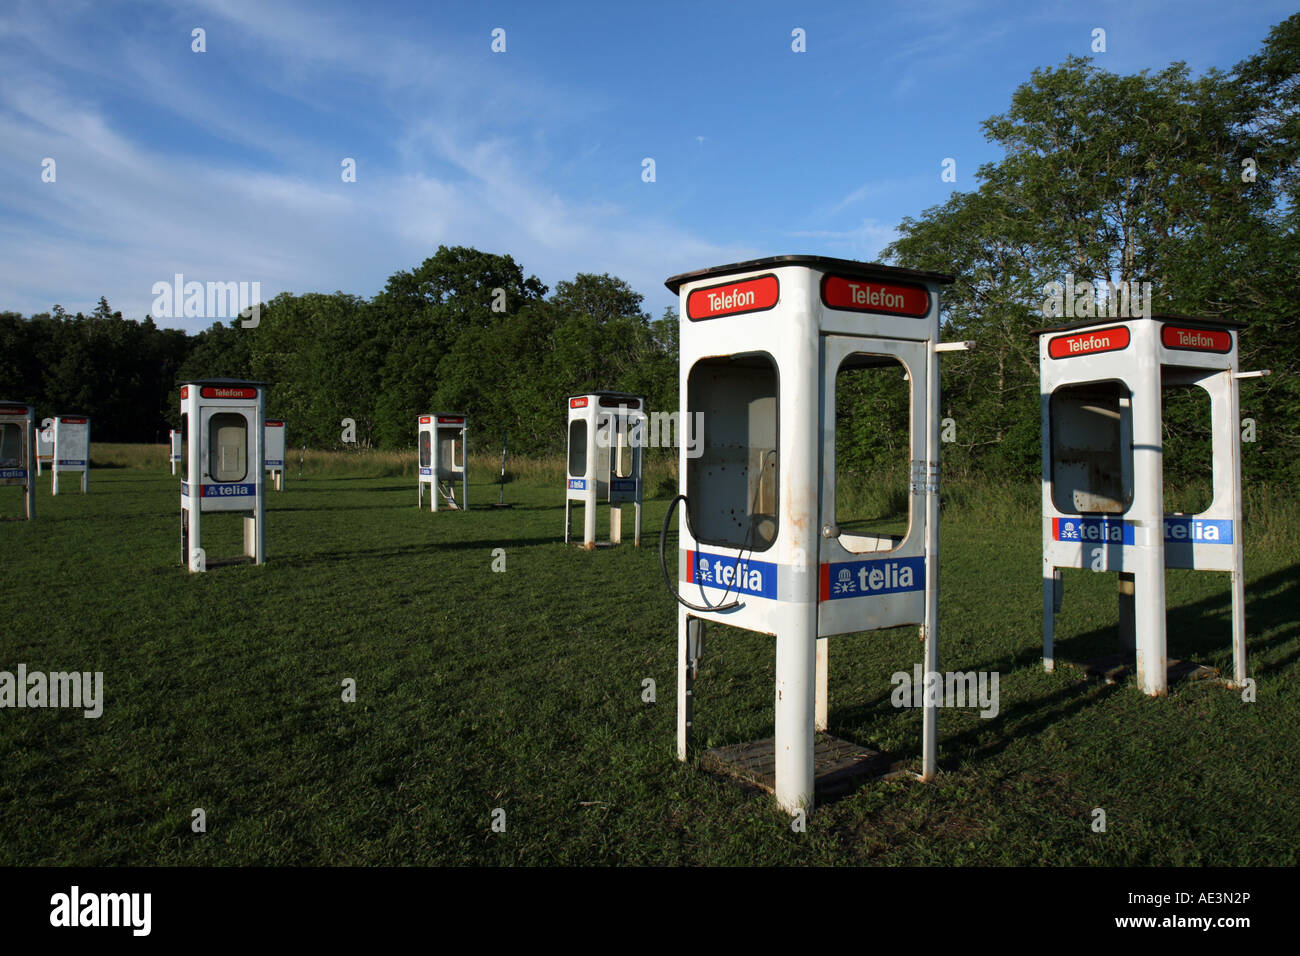 Field of scrapped phone booths Stock Photo